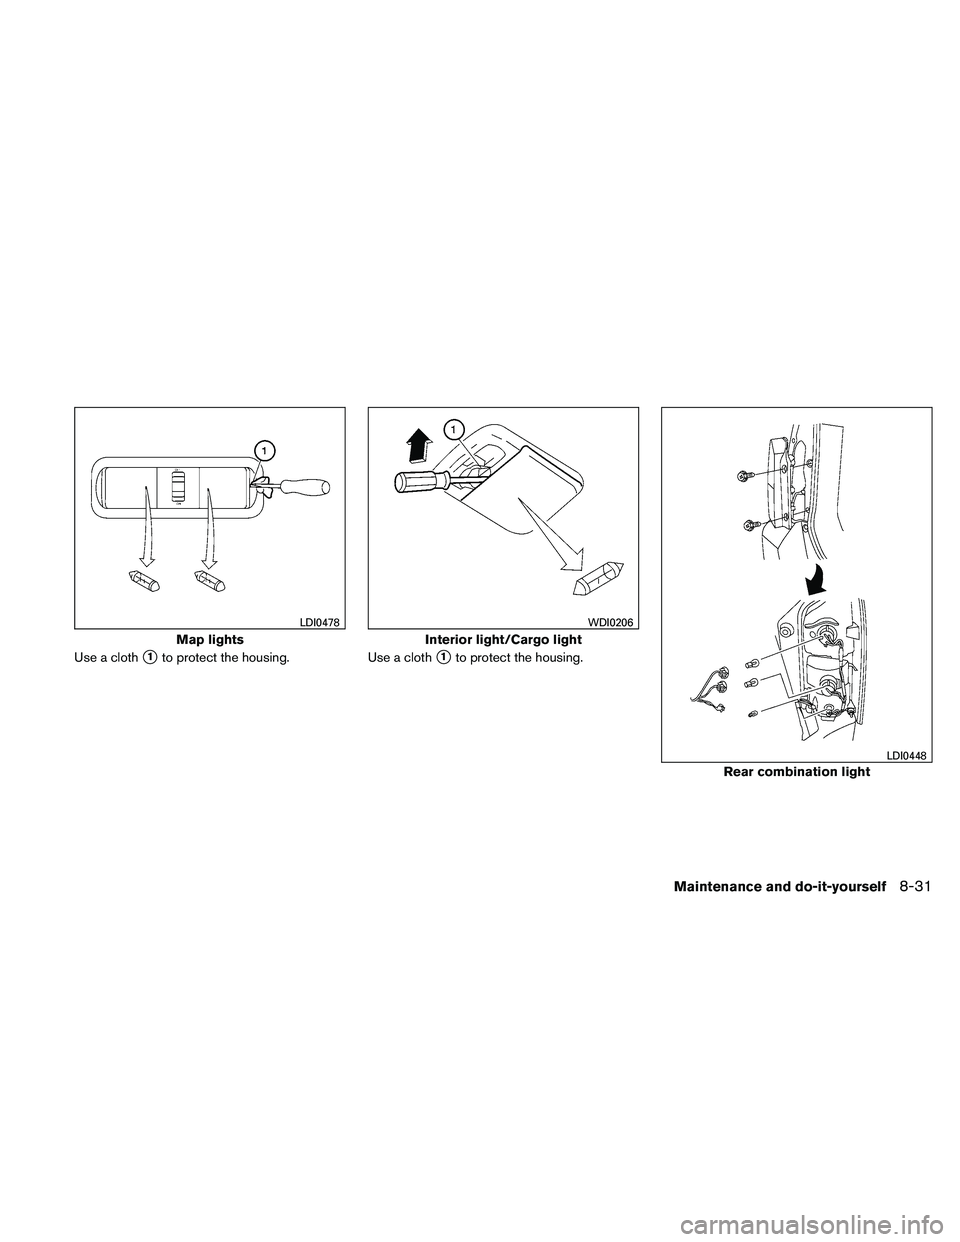 NISSAN XTERRA 2010  Owner´s Manual Use a cloth1to protect the housing.Use a cloth1to protect the housing.
Map lights
LDI0478
Interior light/Cargo light
WDI0206
Rear combination light
LDI0448
Maintenance and do-it-yourself8-31 